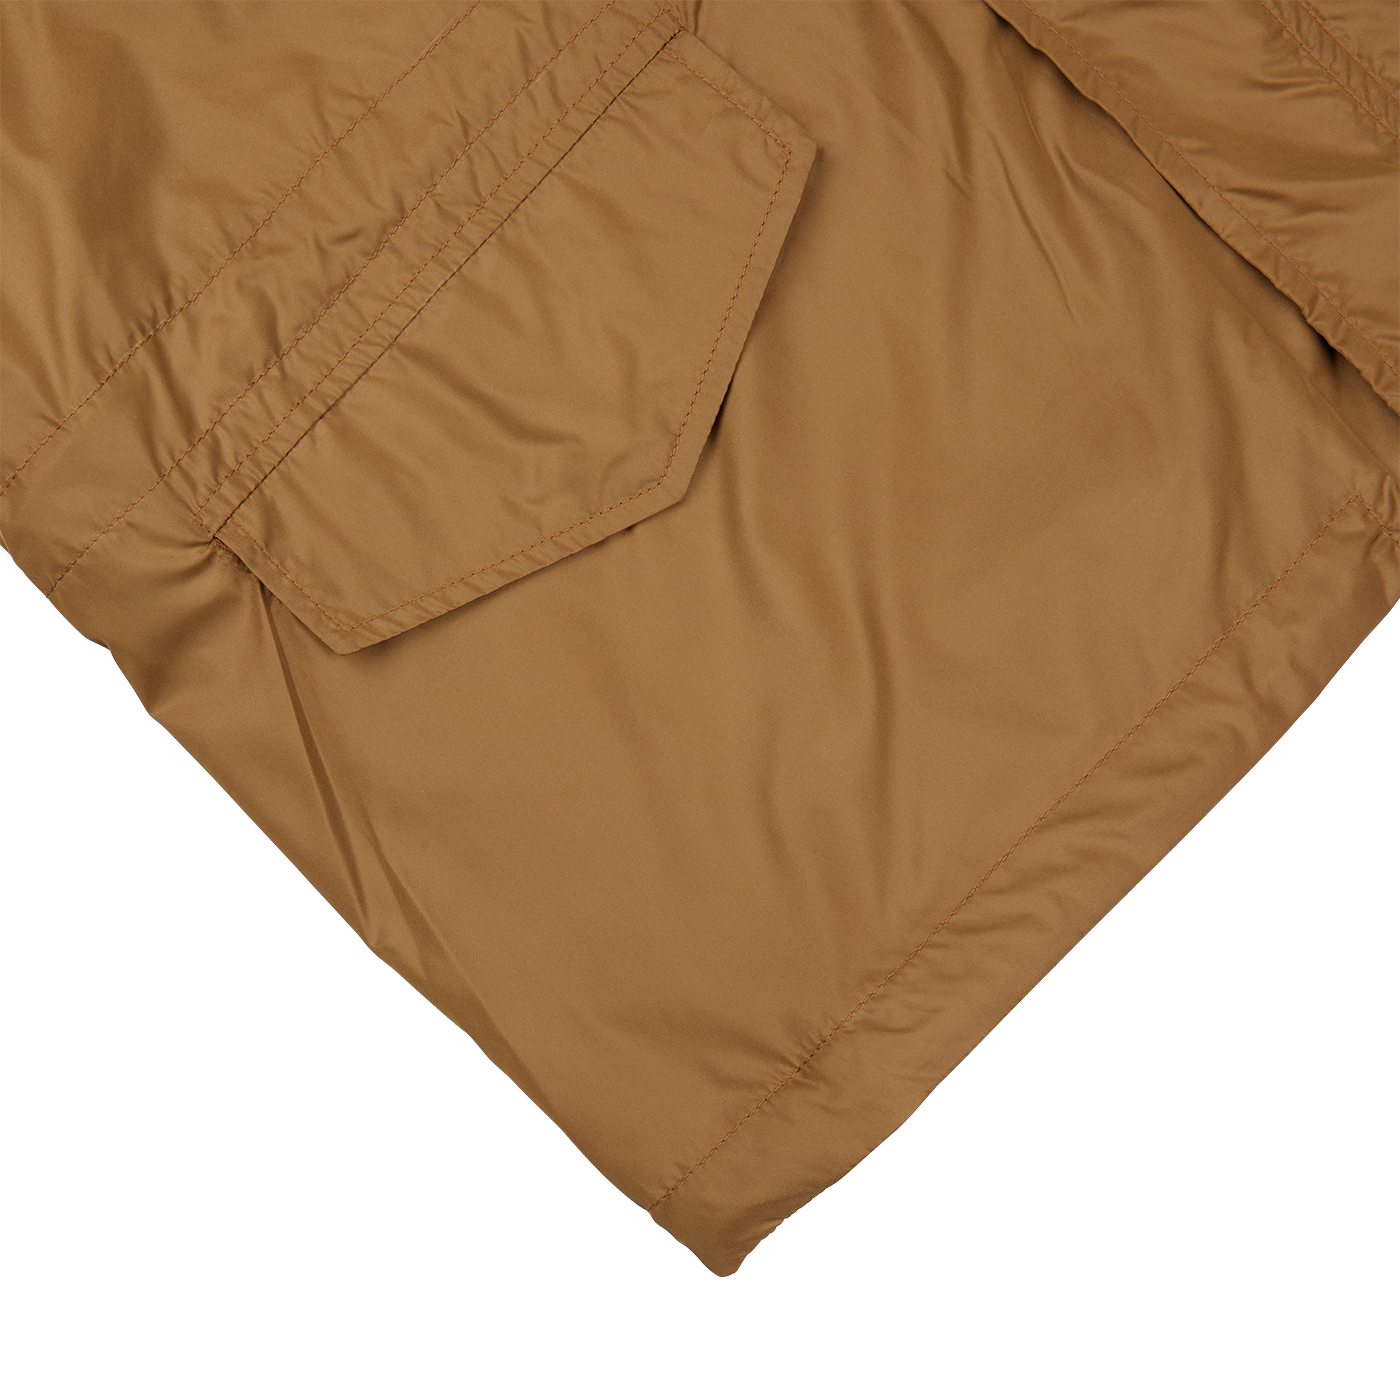 A Amber Brown Recycled Nylon Field Jacket with pockets, perfect for outdoor activities. Brand: Aspesi